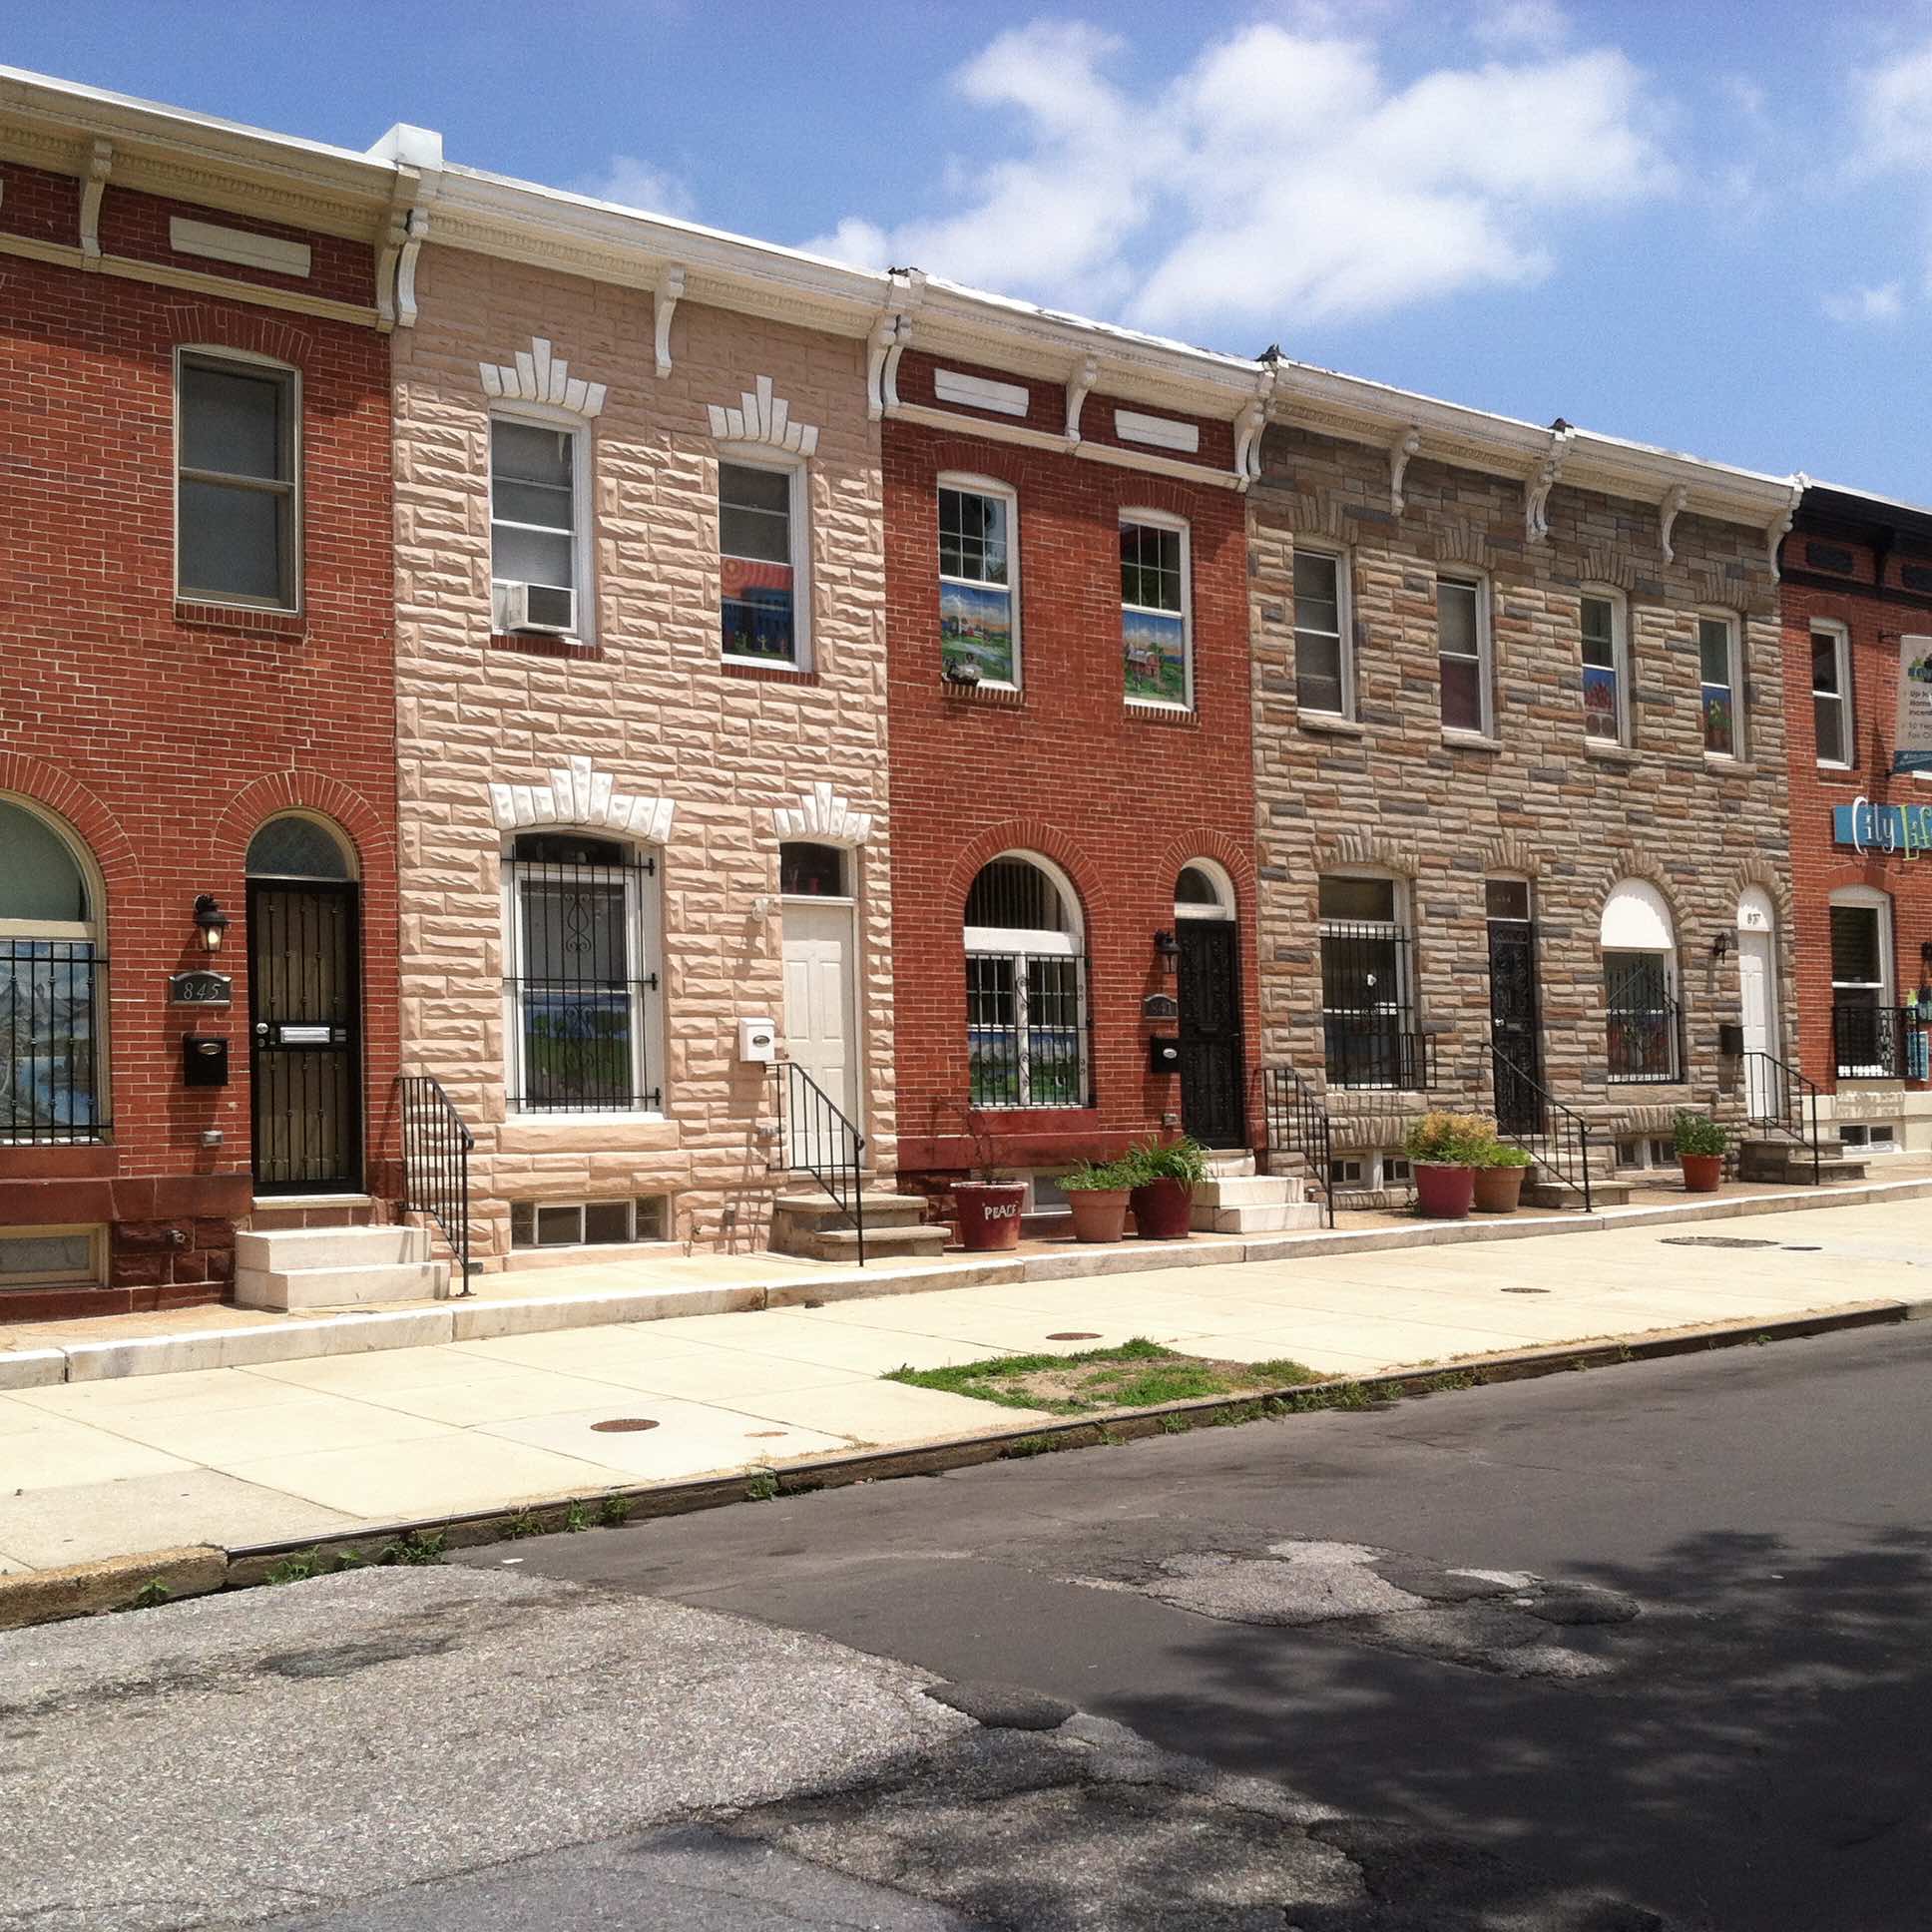 Row_houses_in_East_Monument_Historic_District,_Baltimore,_Maryland.jpg